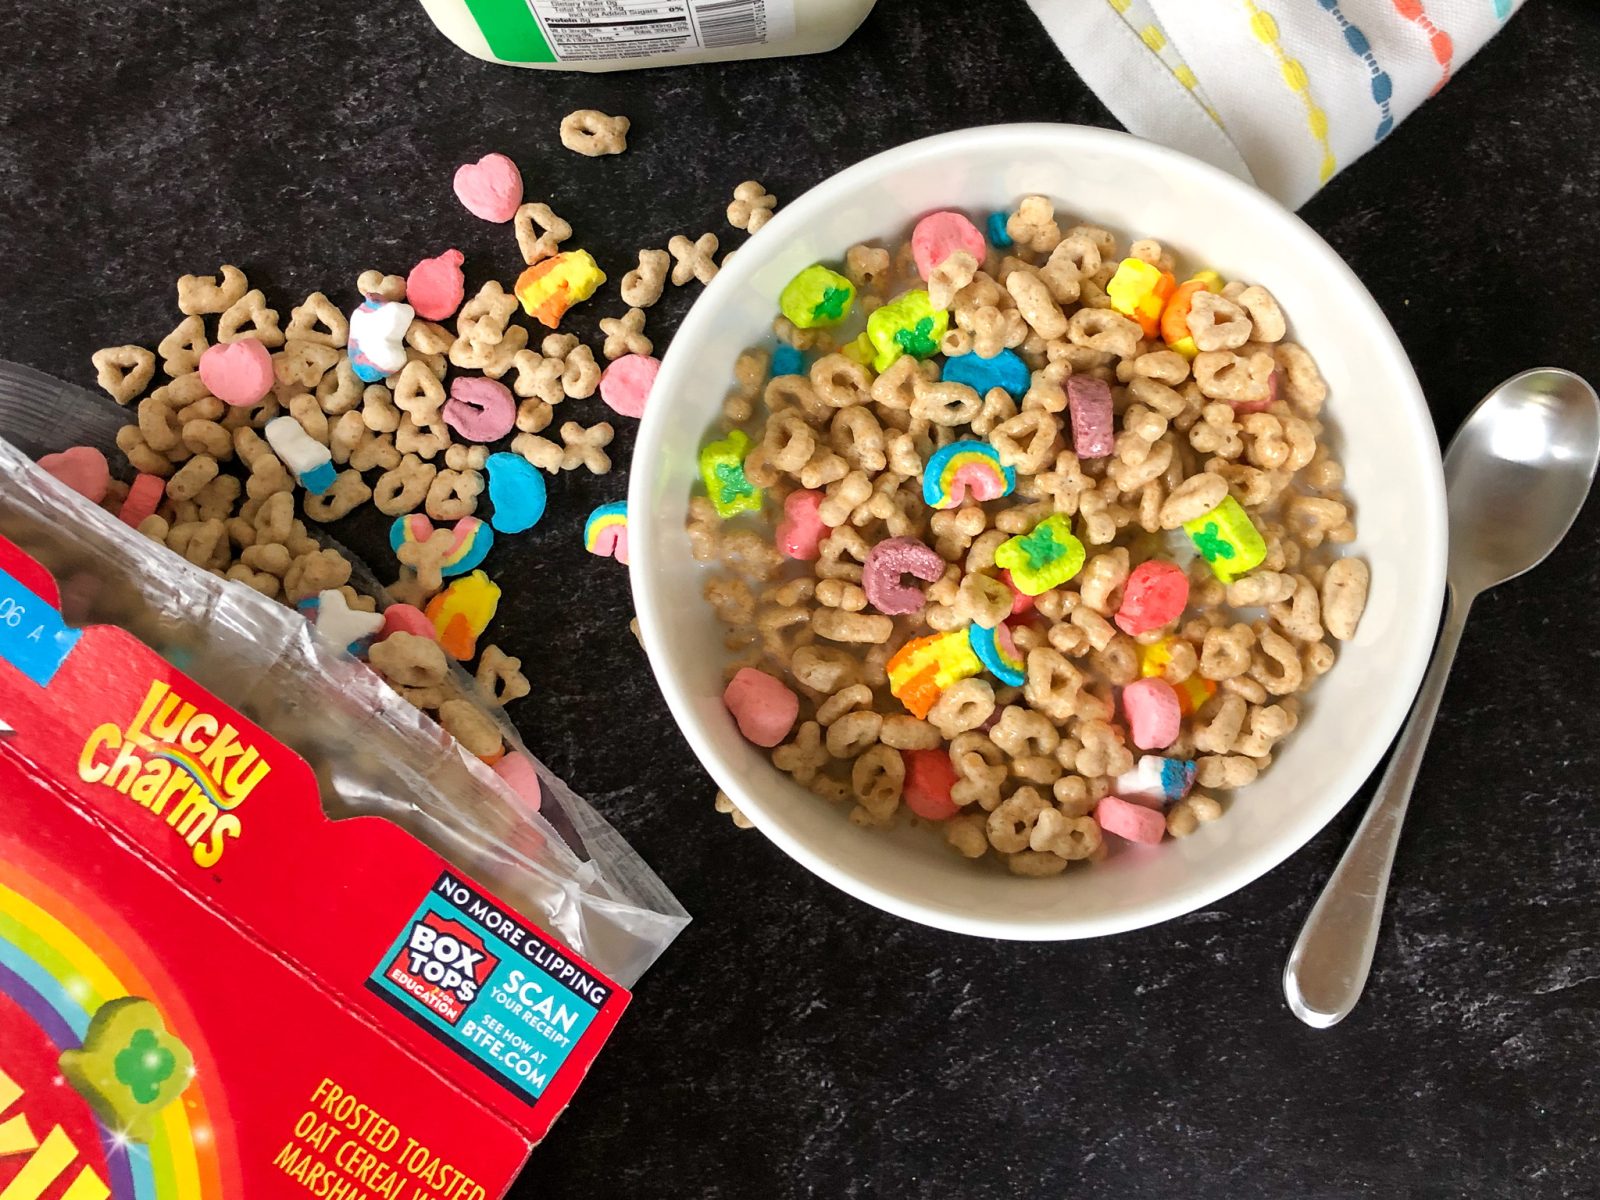 Get A Box Of General Mills Lucky Charms Cereal For As Low As 60¢ At Publix With New Rebate